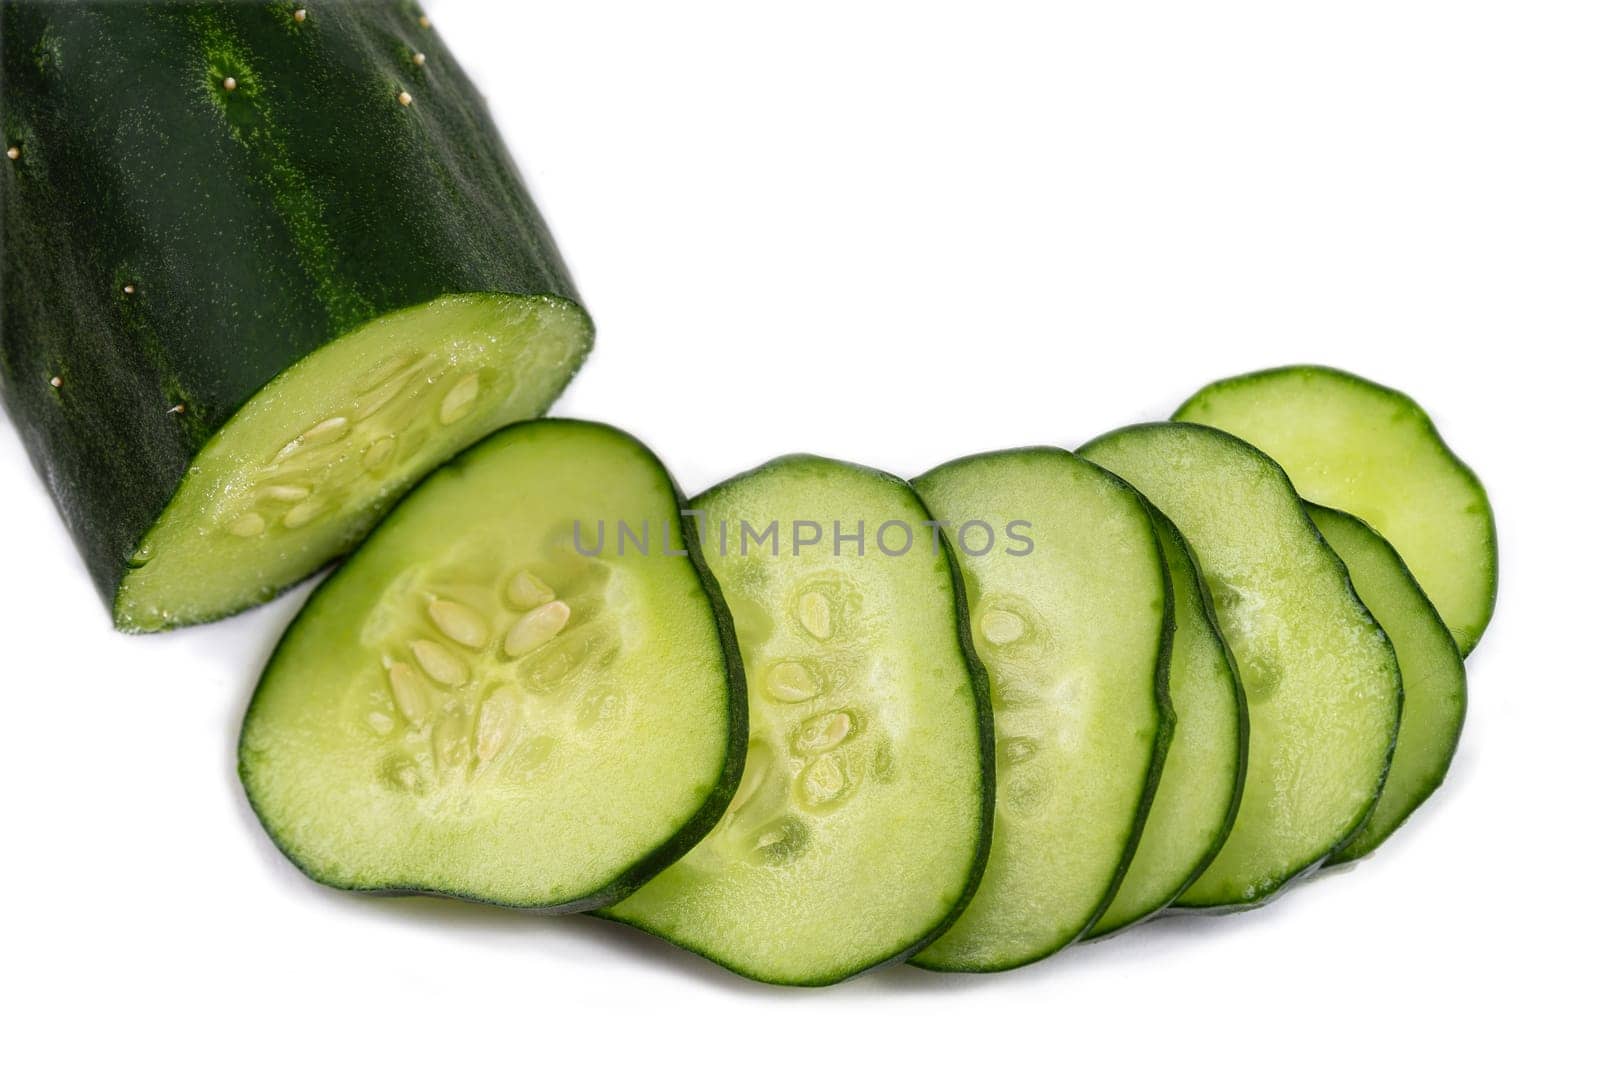 Cucumber clipping path. Cucumber vegetable with cucumber slice isolated on white background. by JPC-PROD